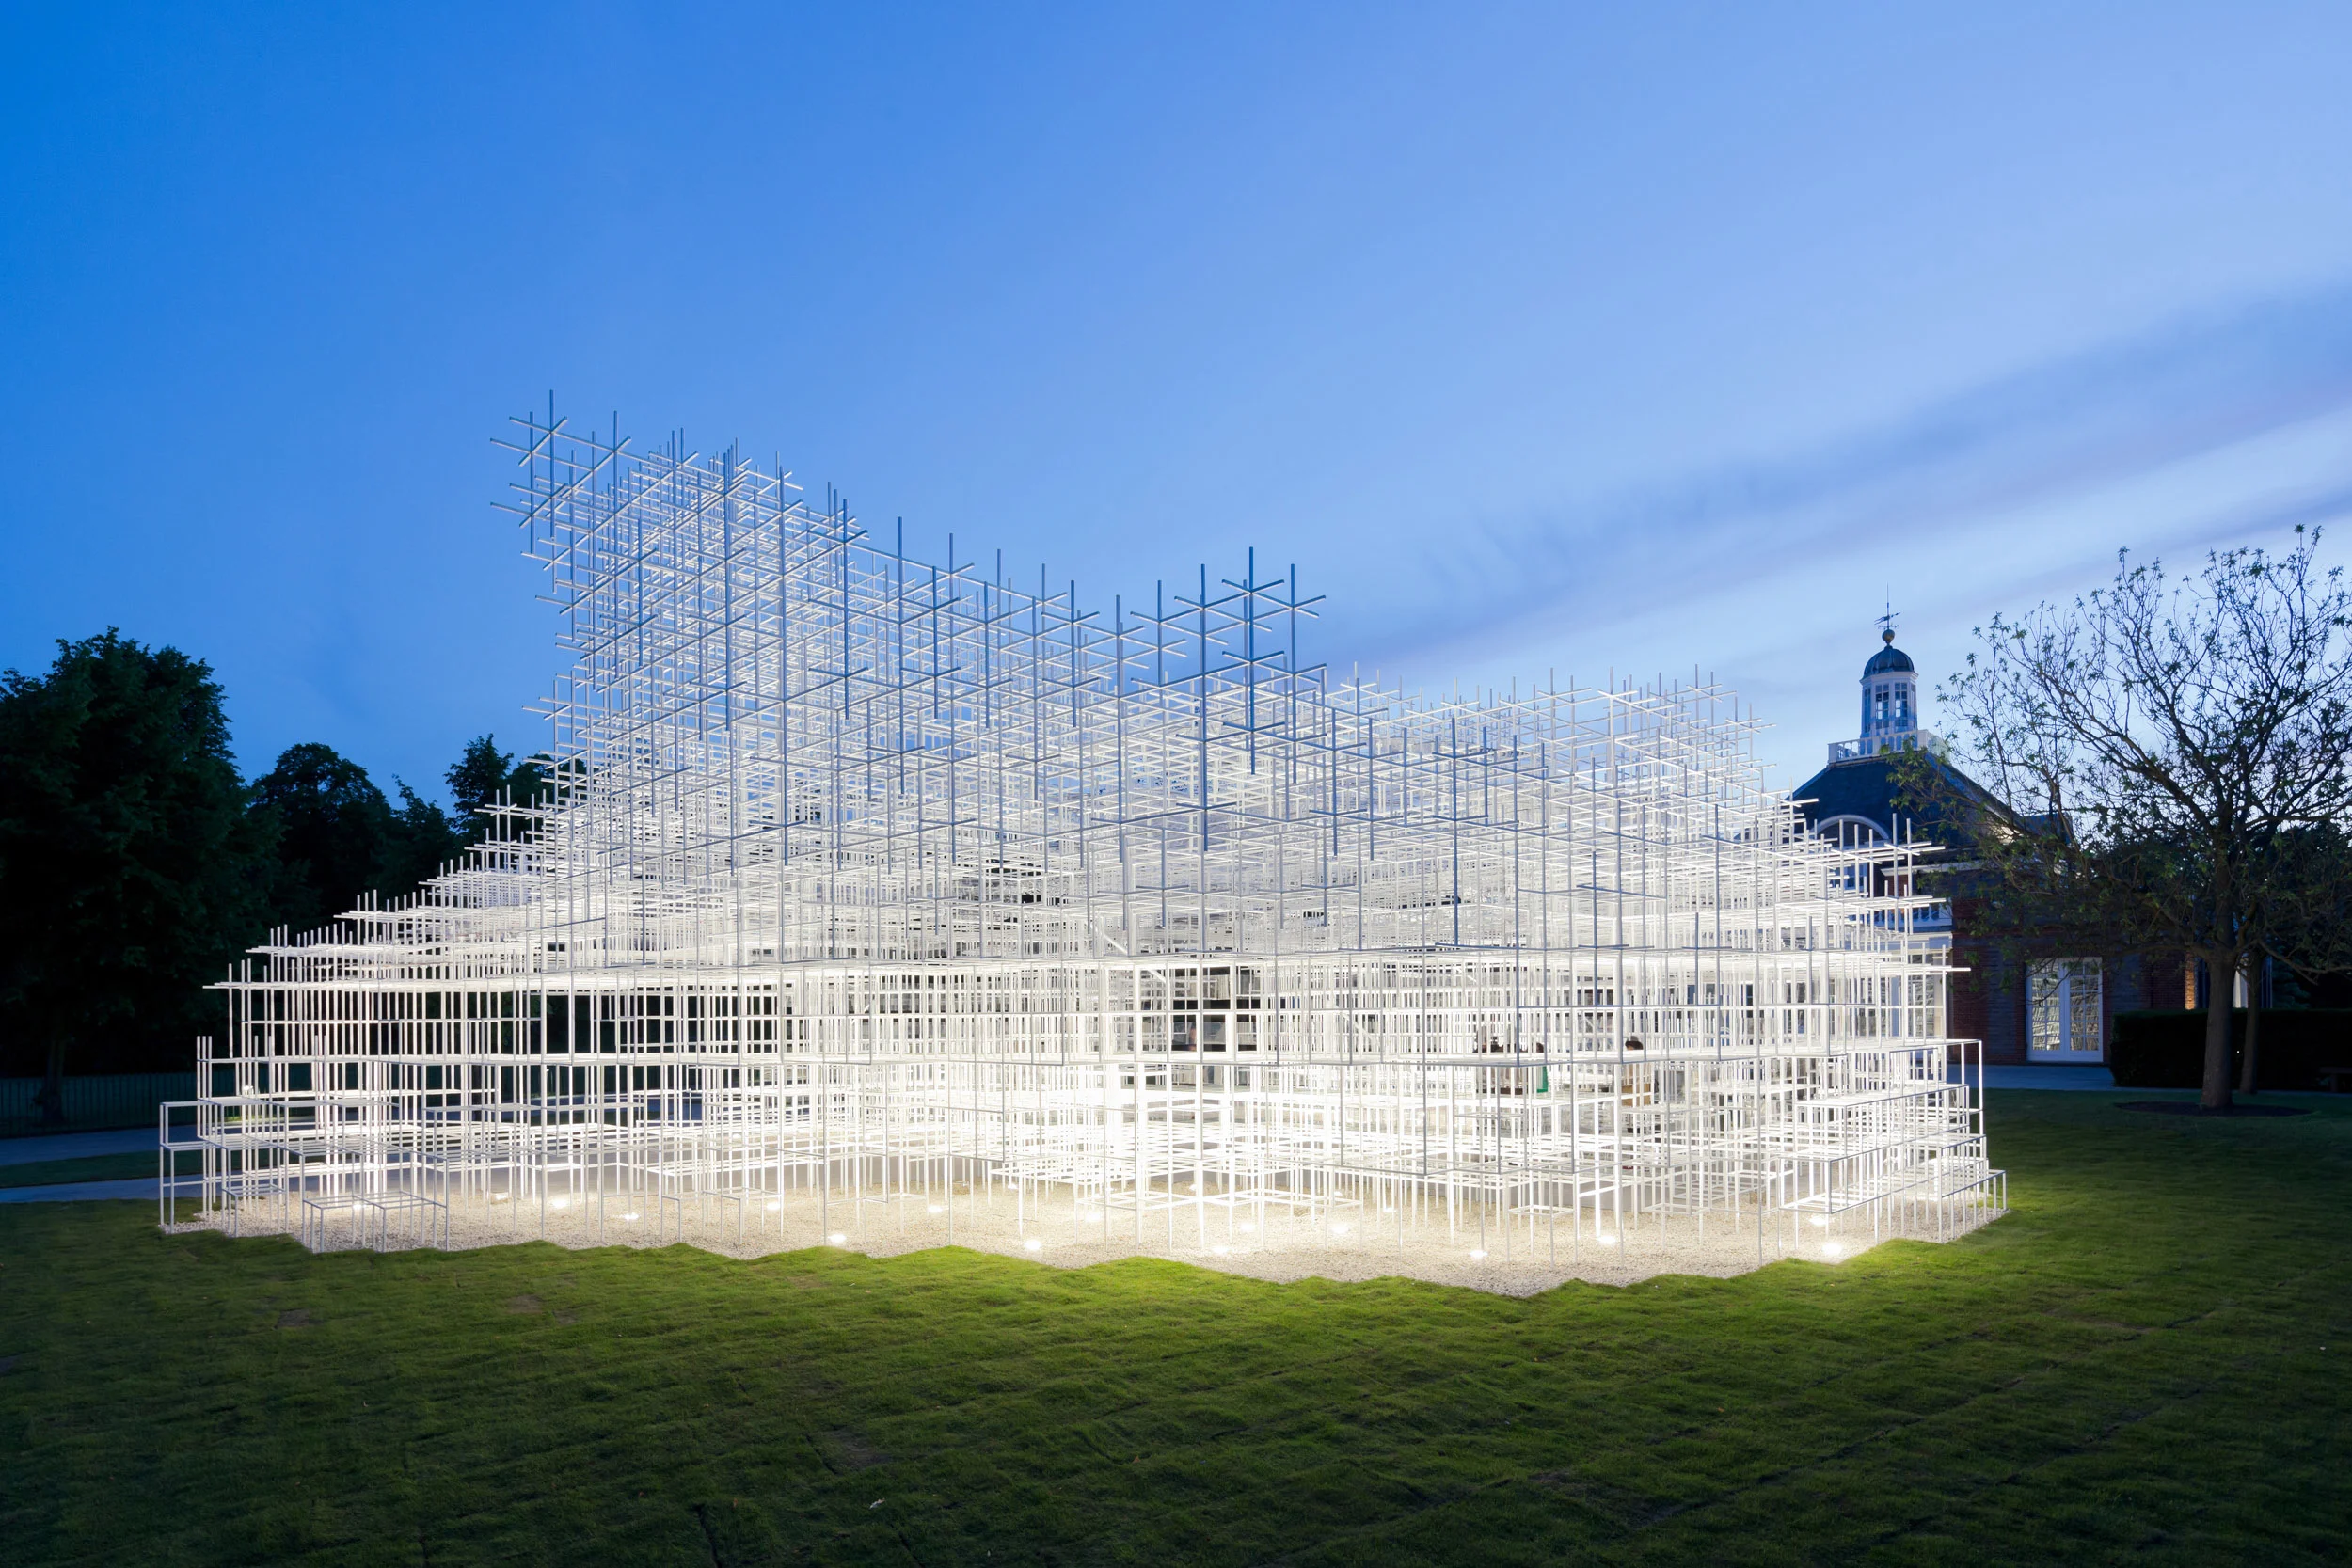 Cover Image - The Serpentine Pavilion